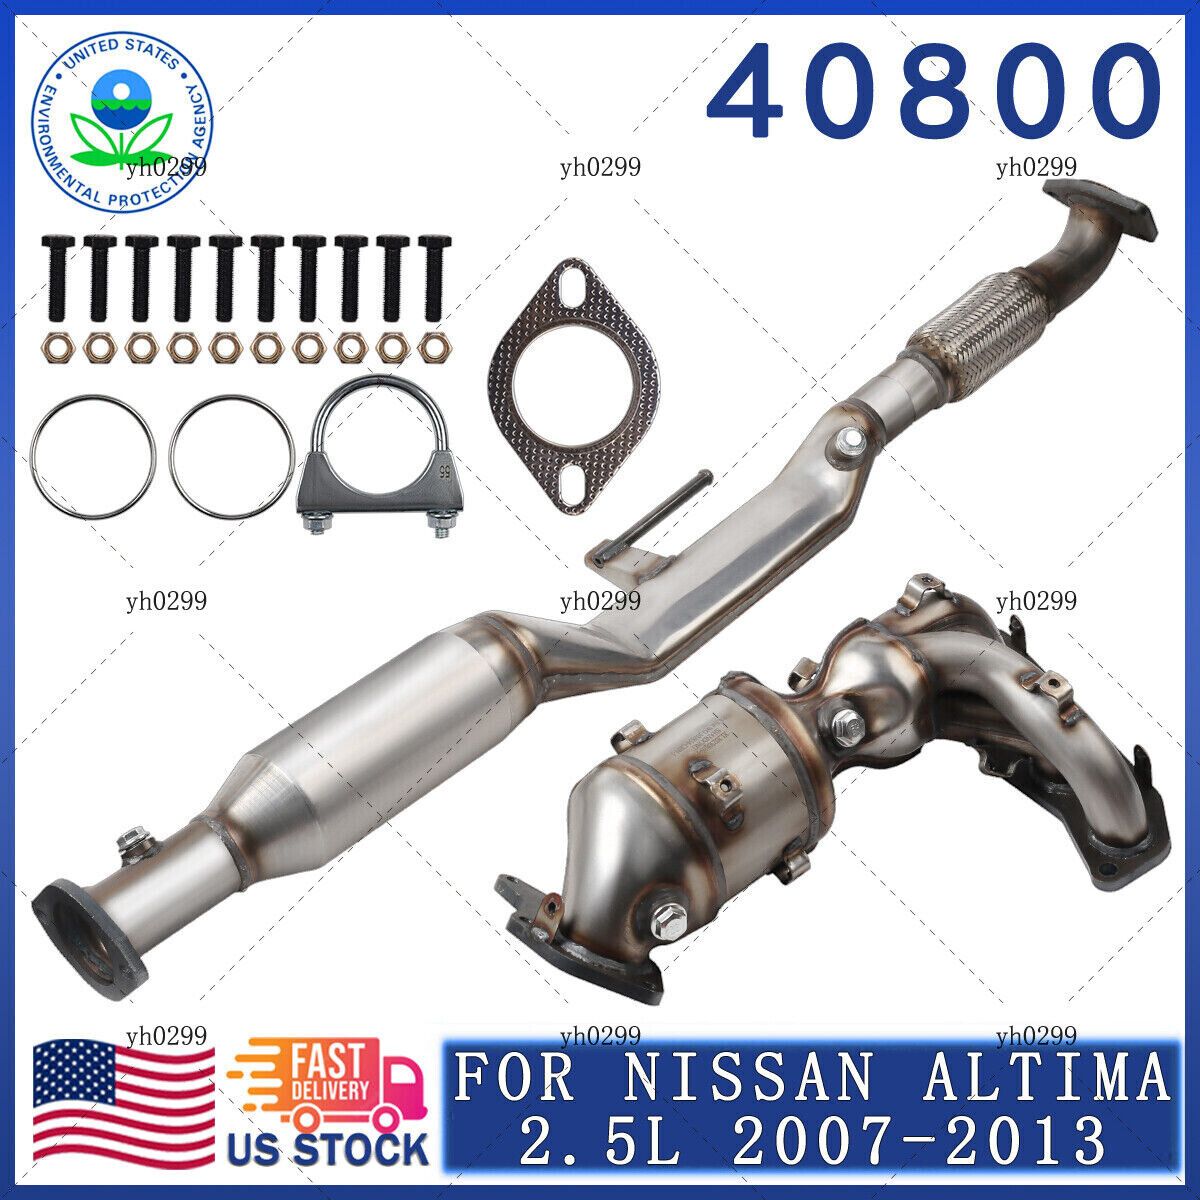 For 2007-2013 Nissan Altima 2.5L BOTH Catalytic Converter Front & Rear w/ Gasket